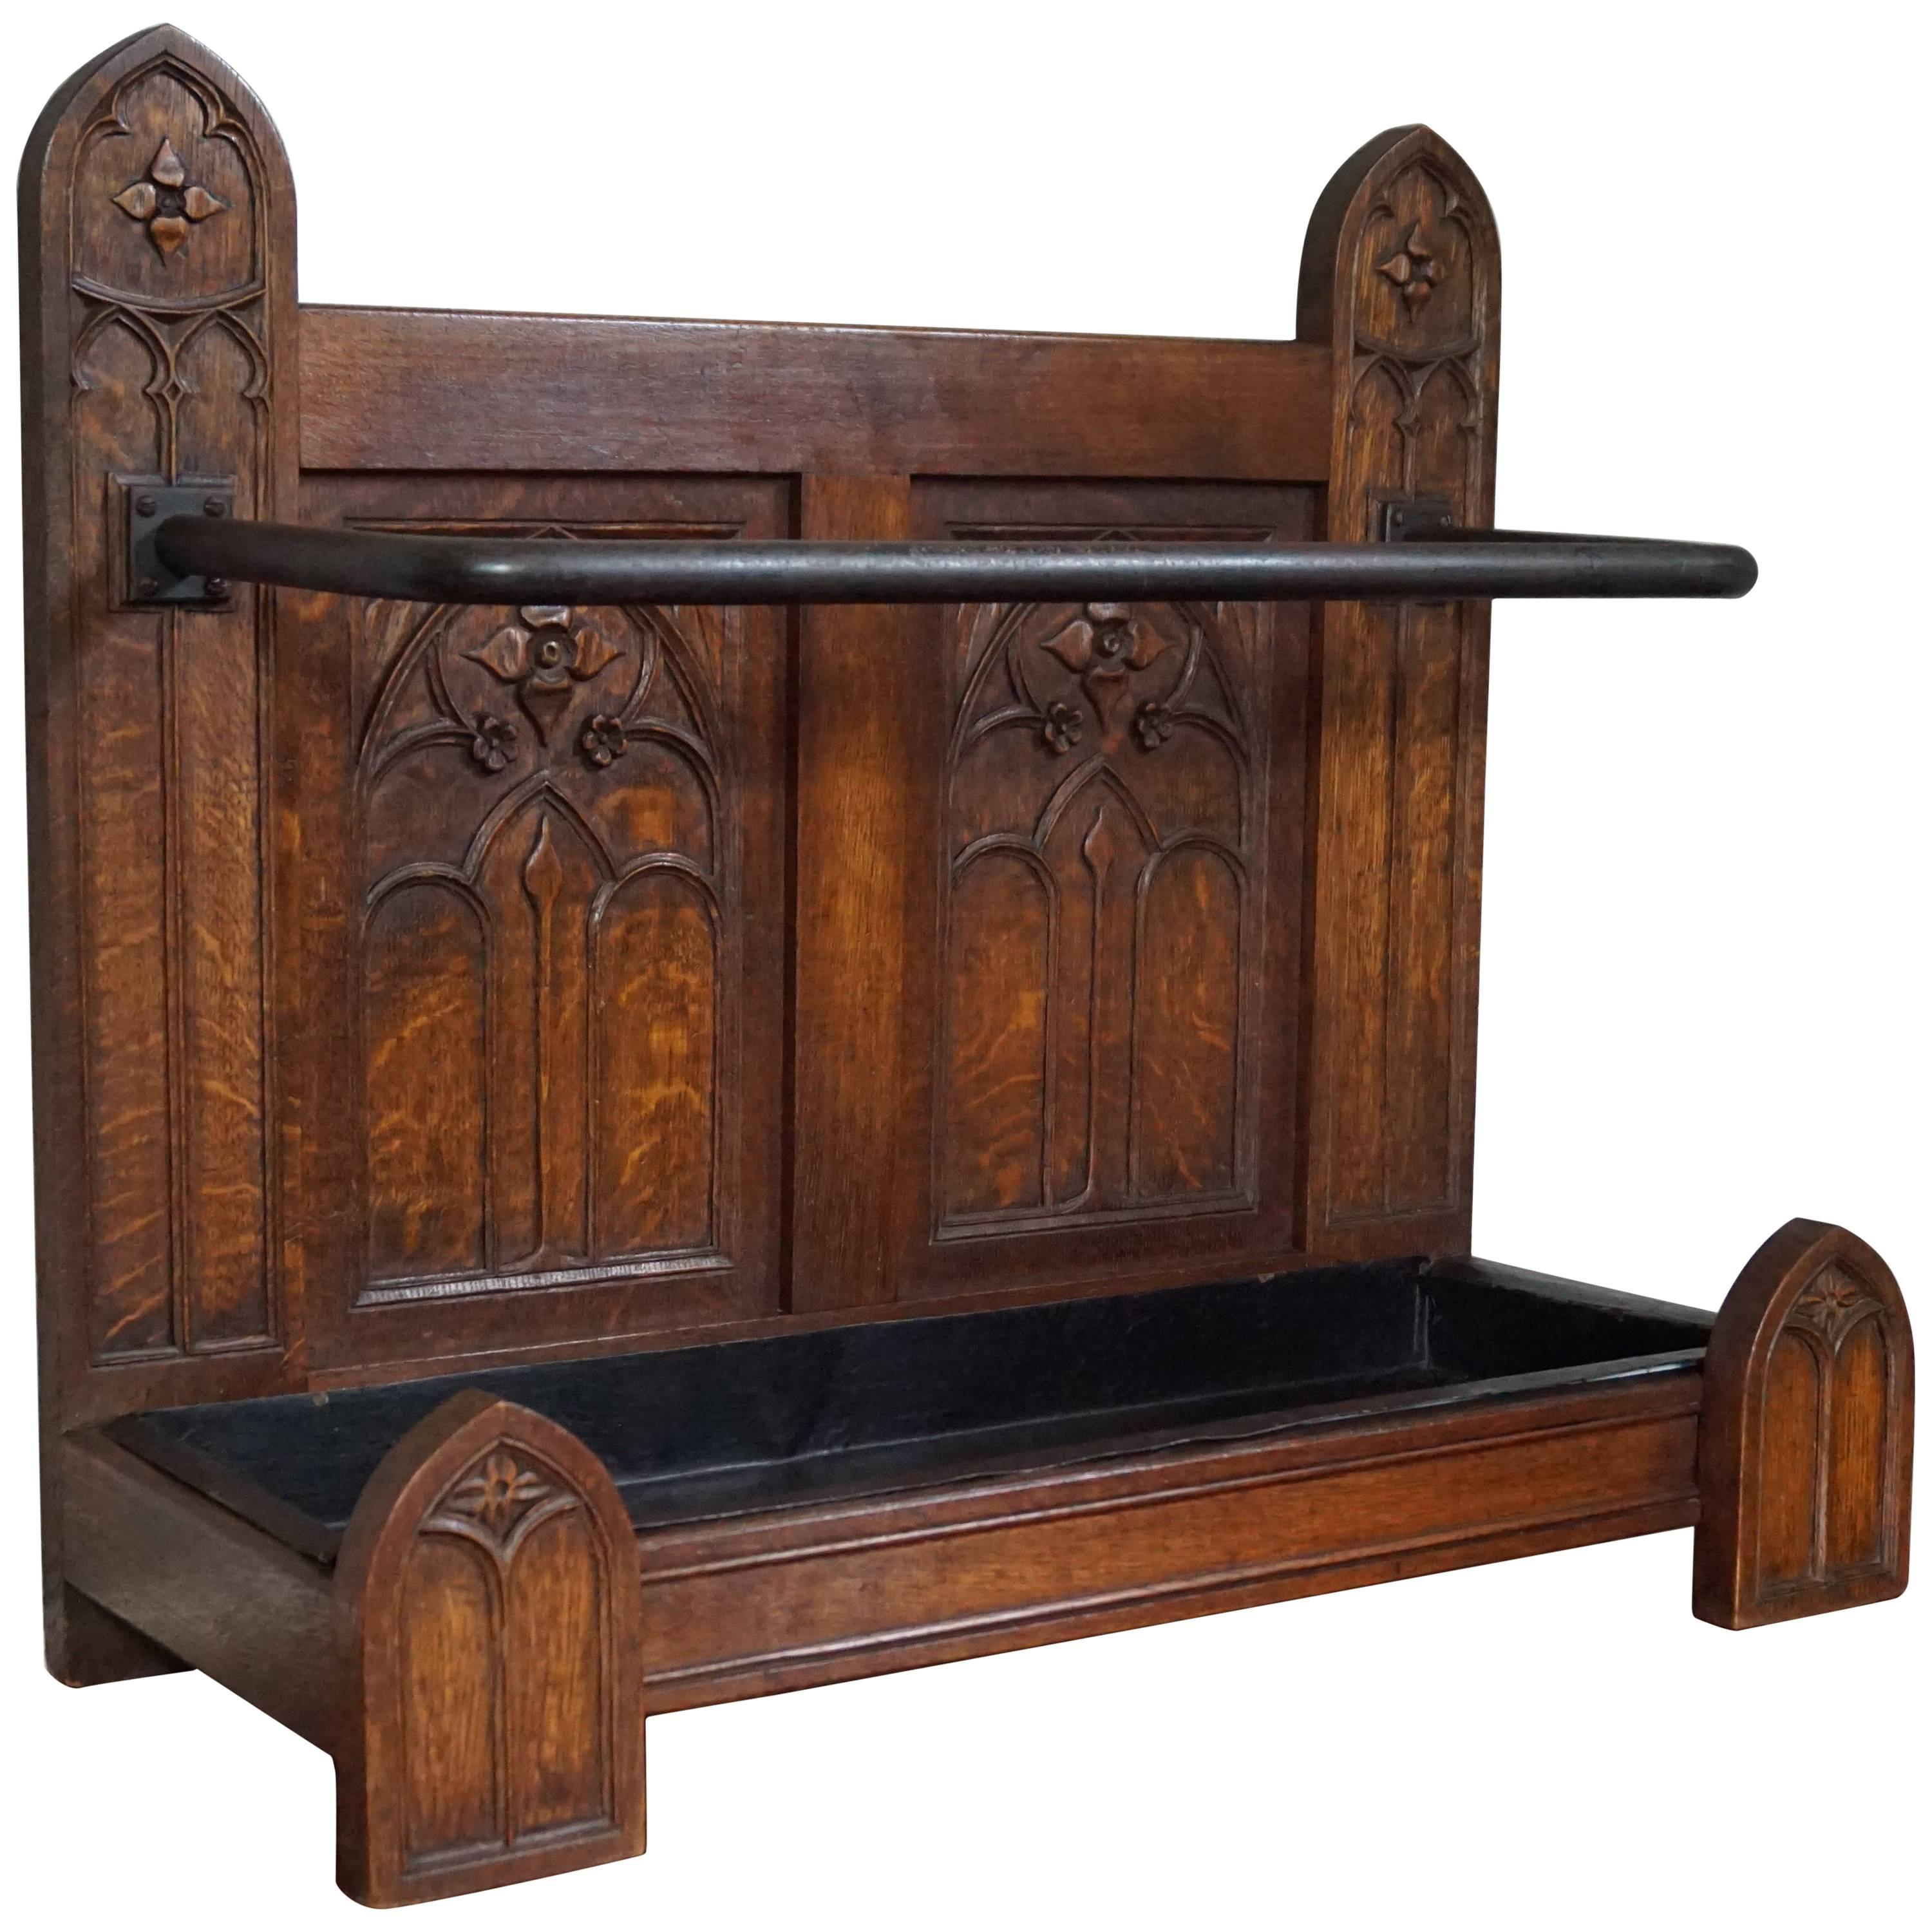 Striking Early 20th Century Hand-Carved Gothic Revival Umbrella and Stick Stand